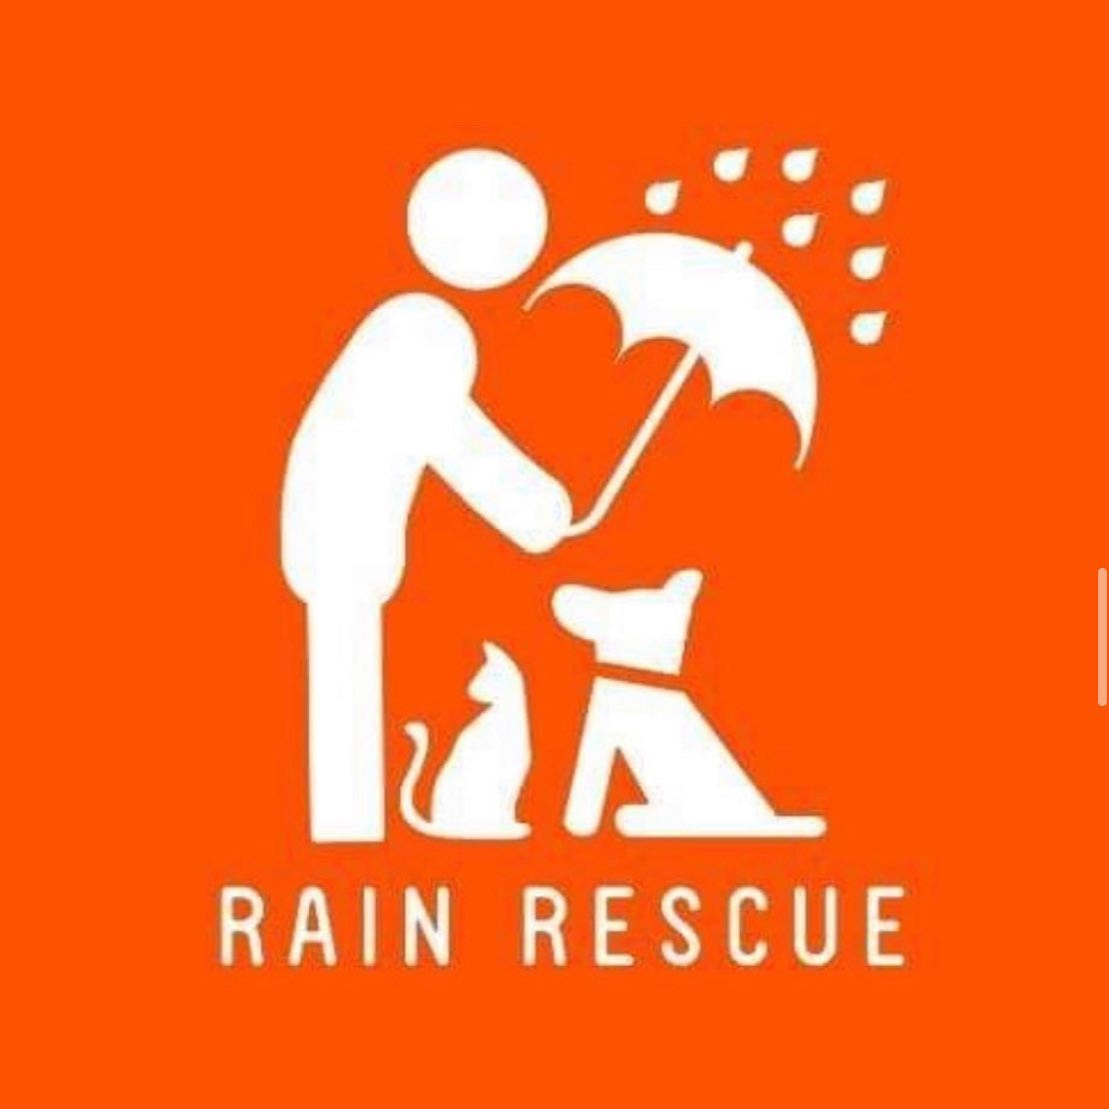 This week’s Charity Tuesday goes to @rainrescue who are joining the Peak District Challenge for t...